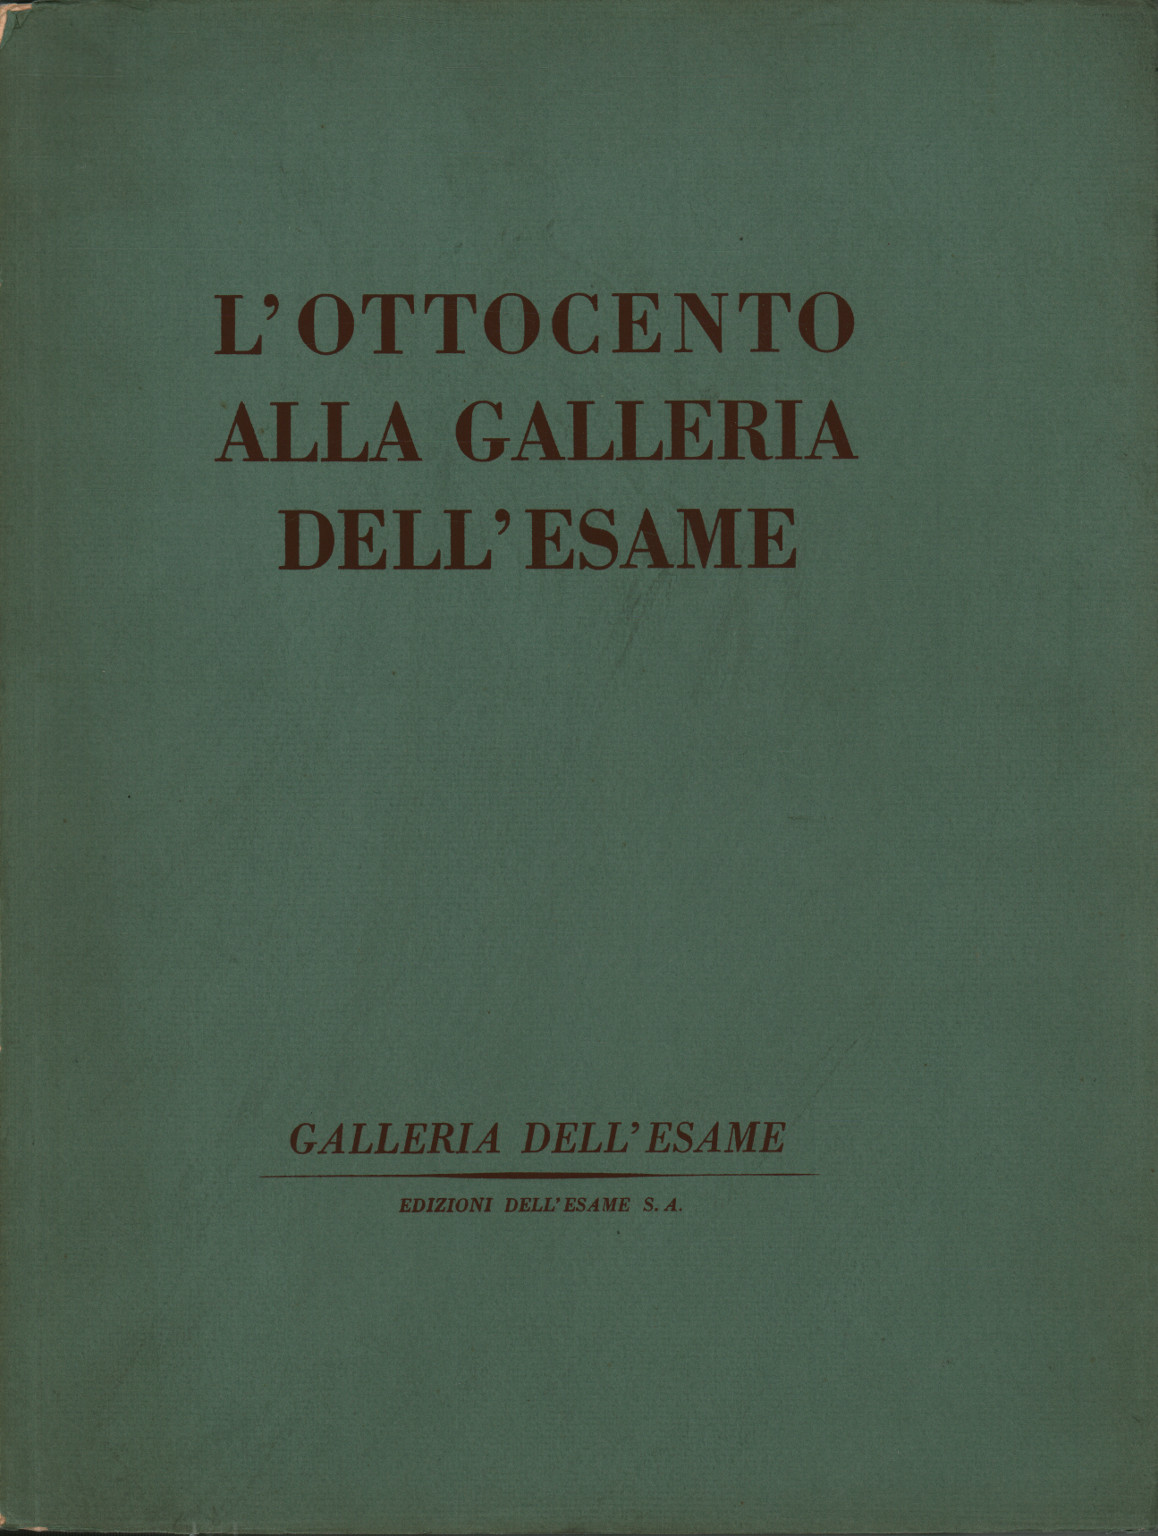 The nineteenth century at the Galleria dell'esame, s.a.